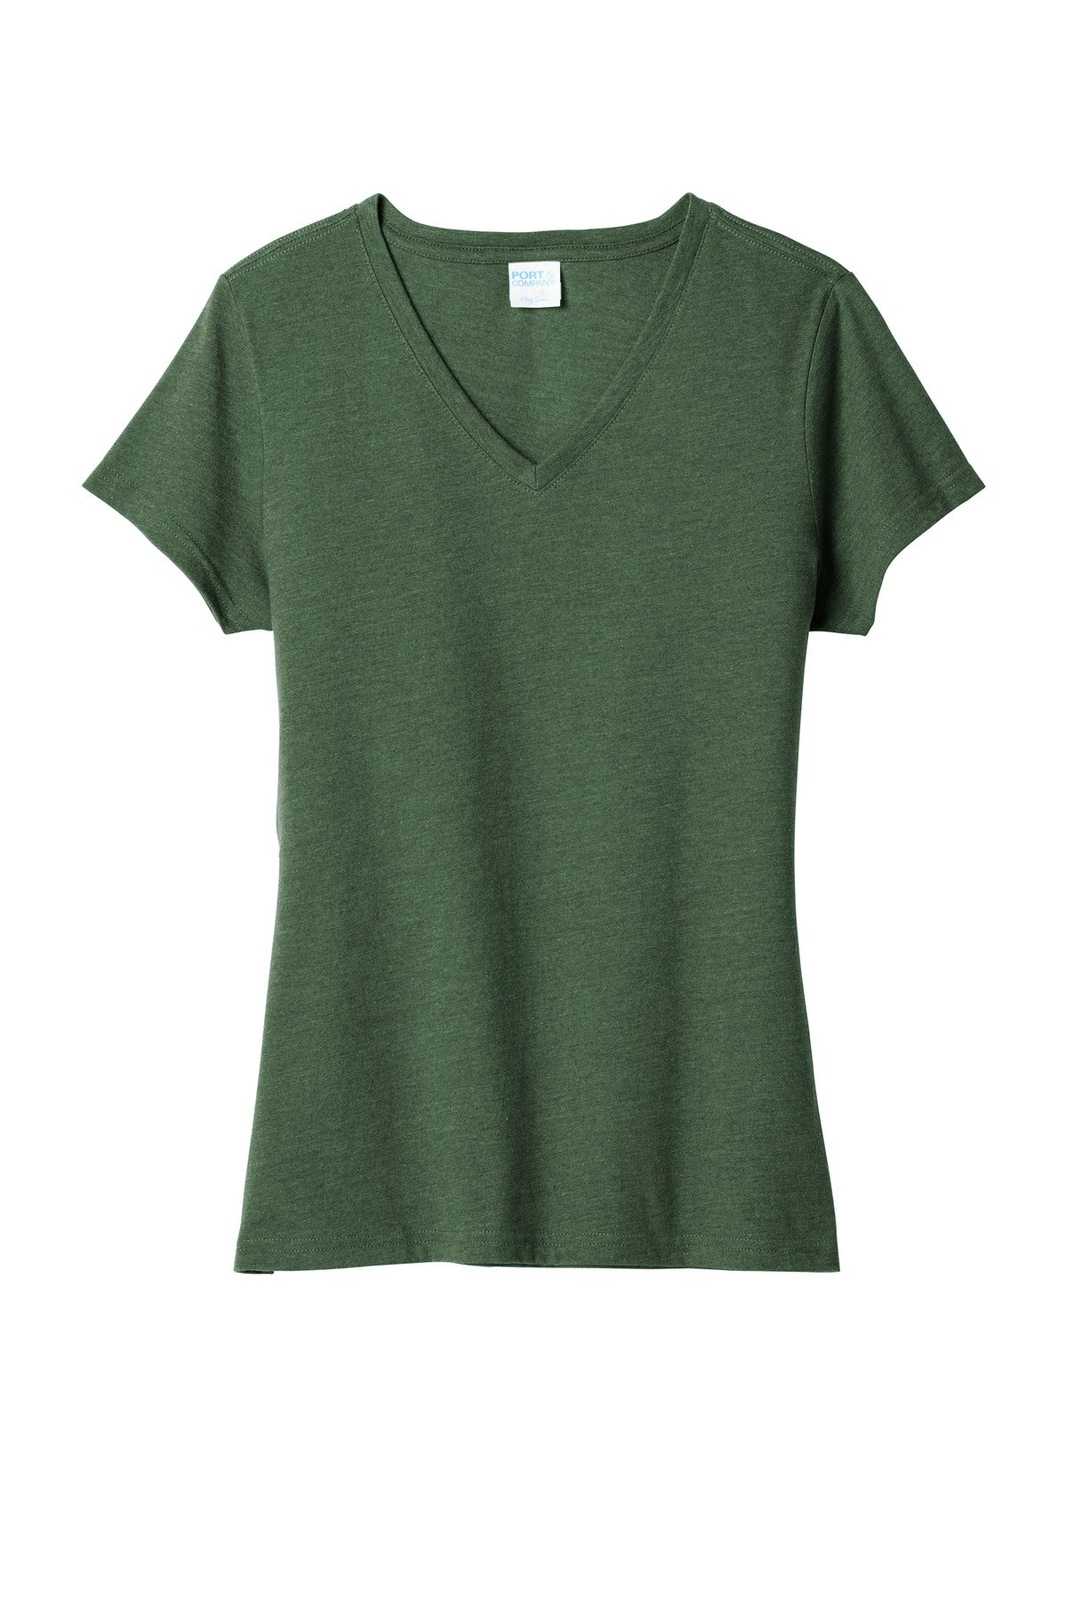 Port &amp; Company LPC455V Ladies Fan Favorite Blend V-Neck Tee - Forest Green Heather - HIT a Double - 5